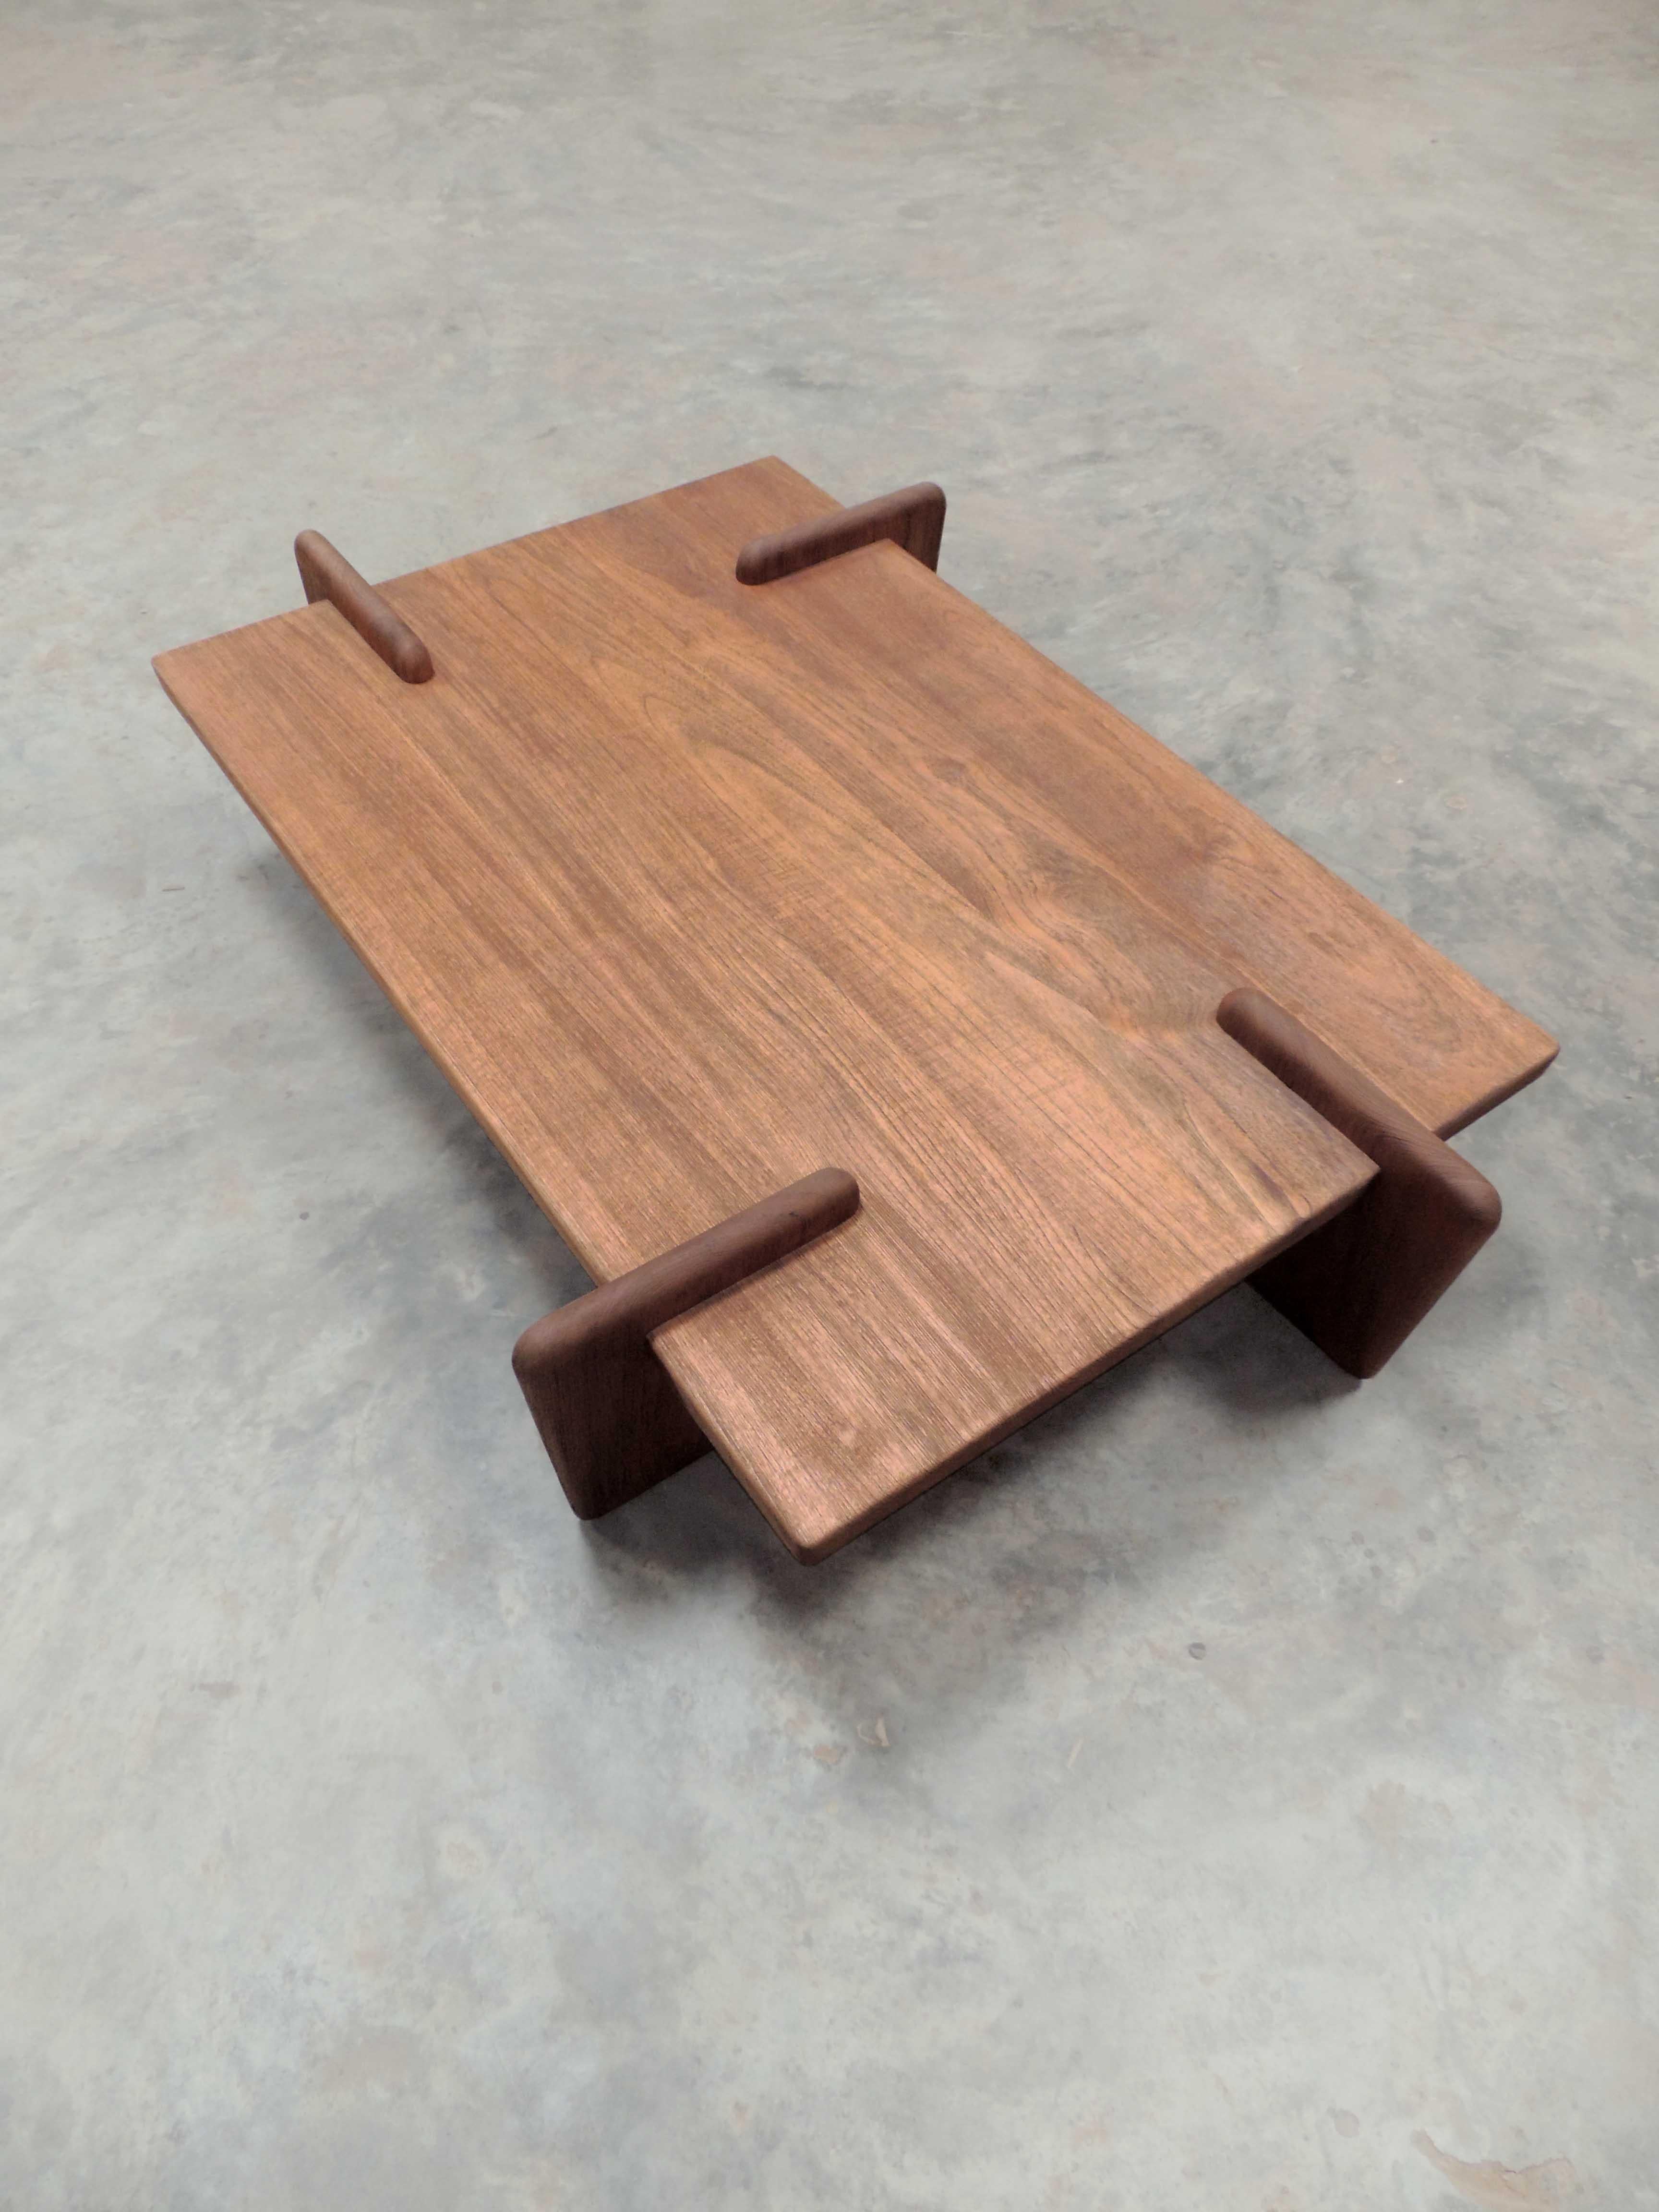 Organic Modern Pierre Jeanneret, Sculptural Coffee Table, Contemporary Reedition